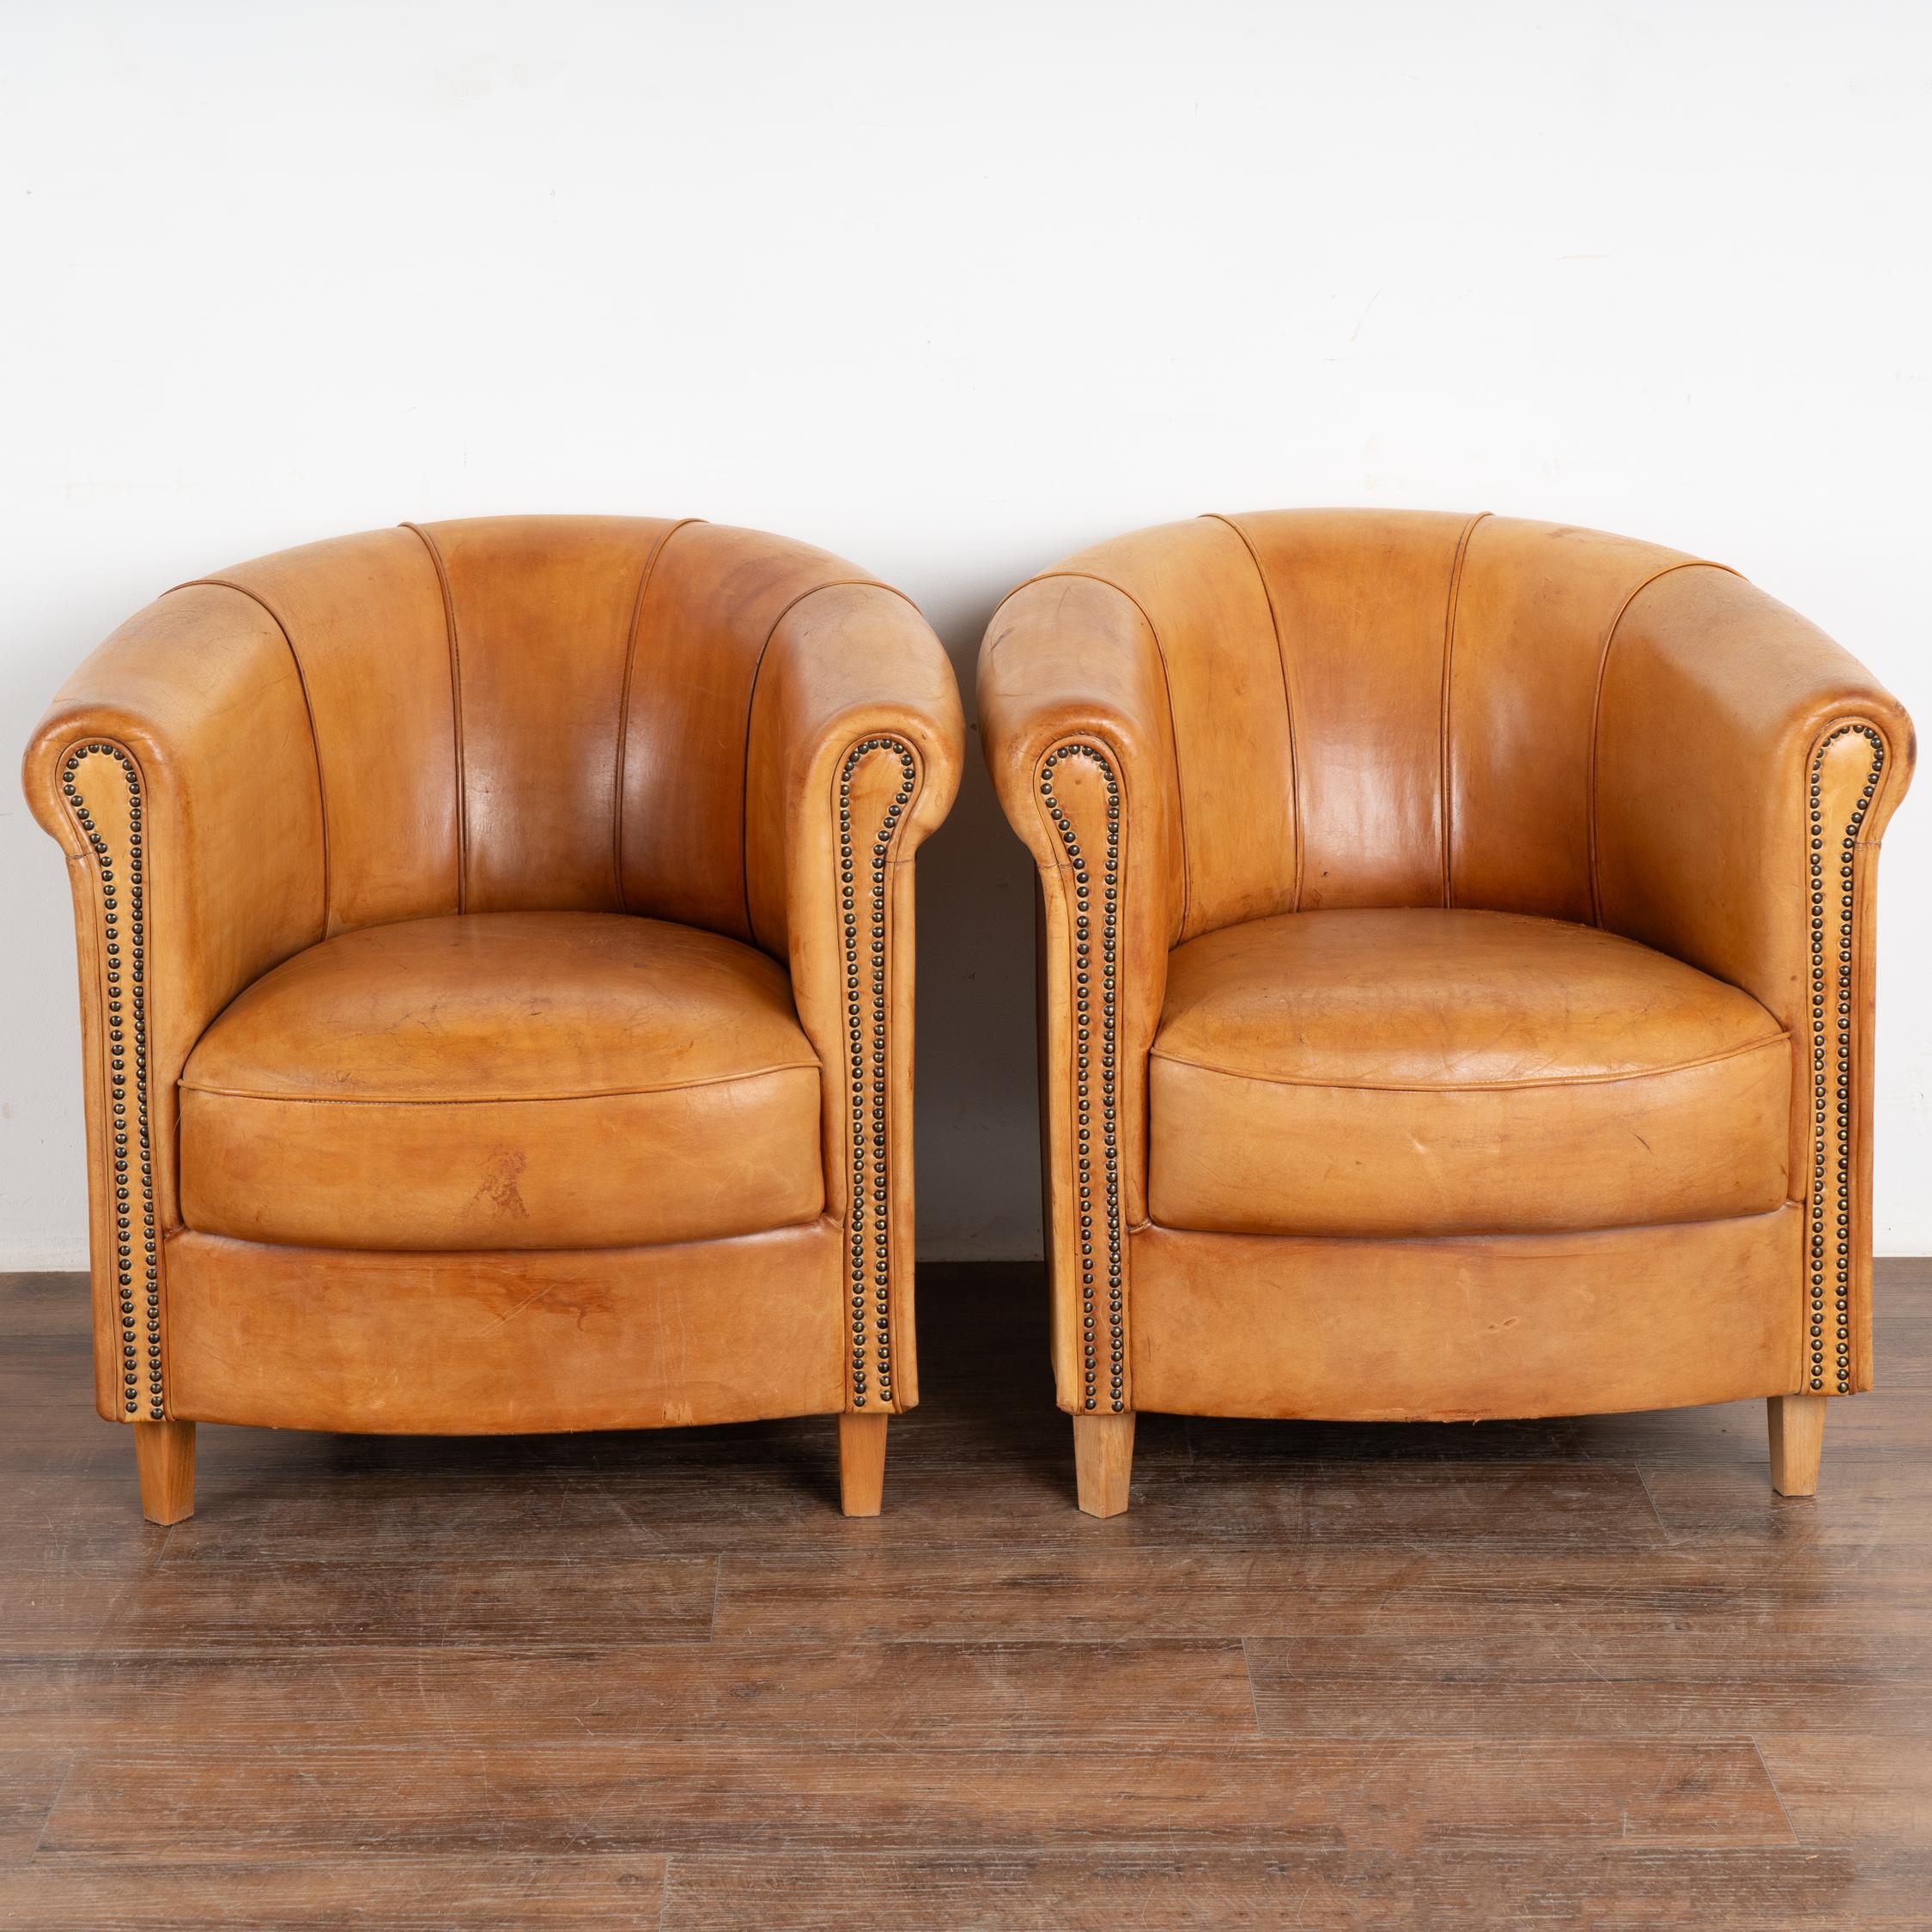 Dutch Pair Art Deco Vintage Leather Club Chairs by Joris of The Netherlands circa 1970